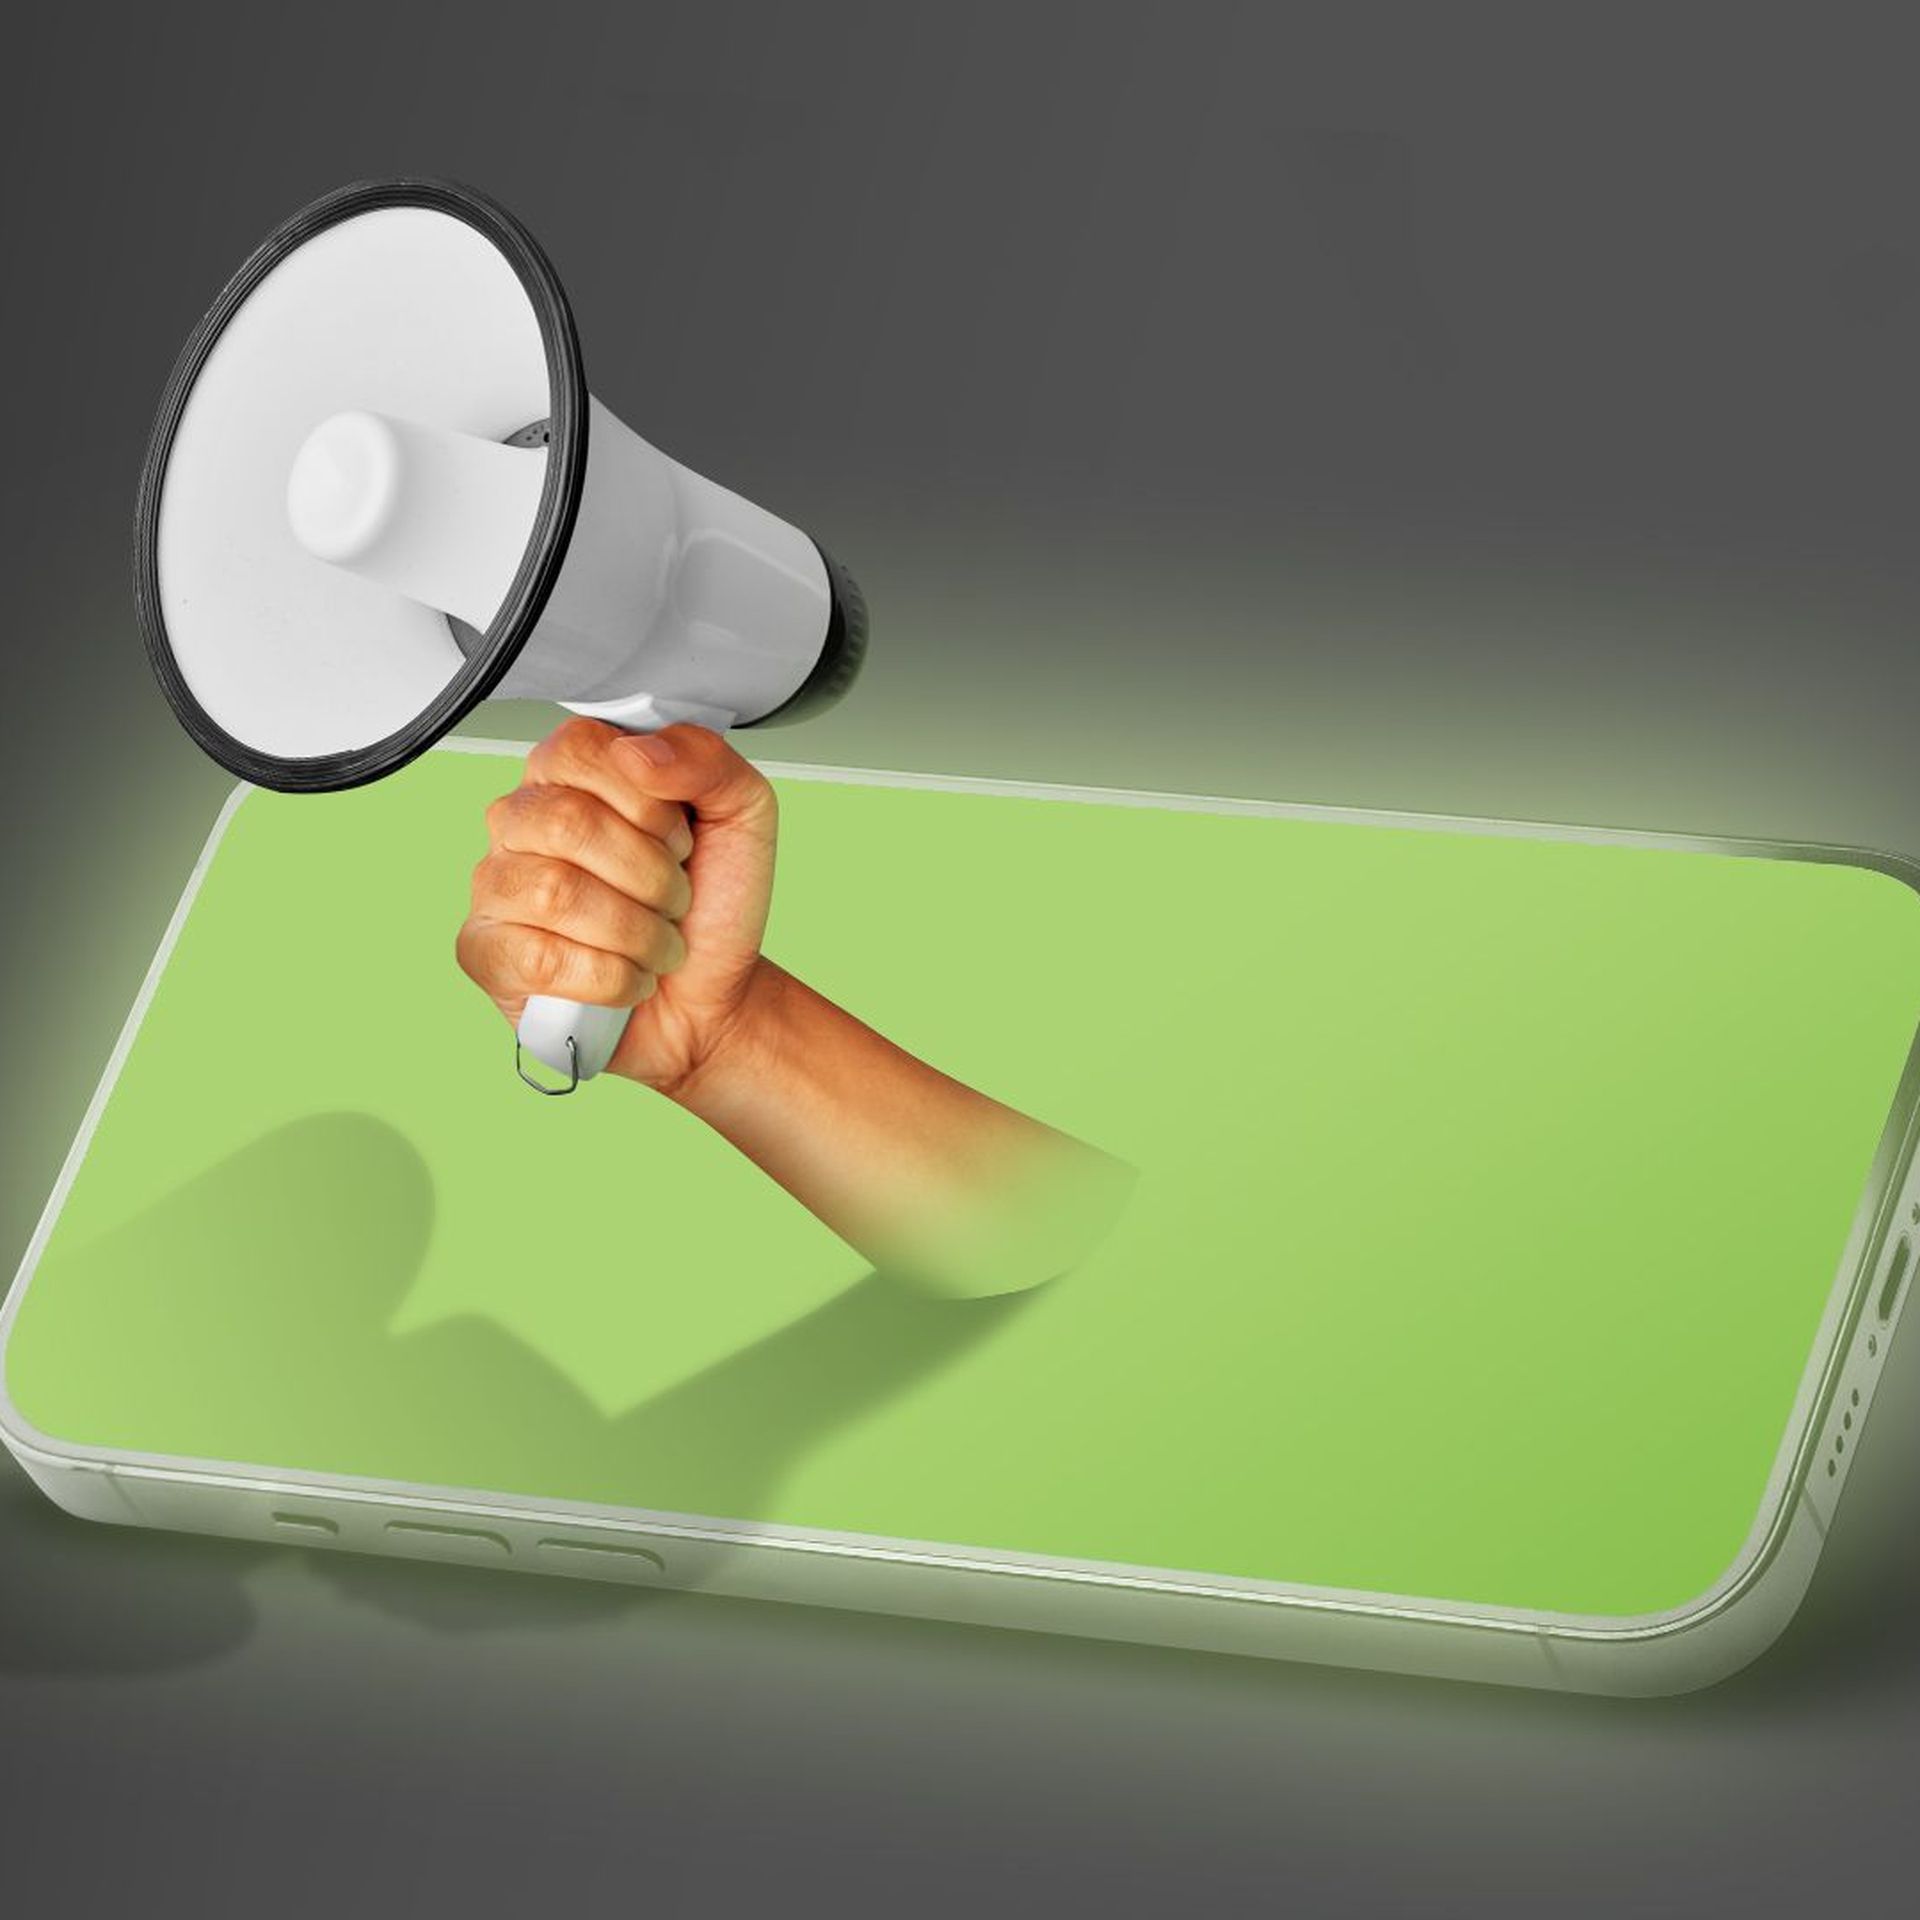 Illustration of a hand with a megaphone coming out from a mobile phone screen.  